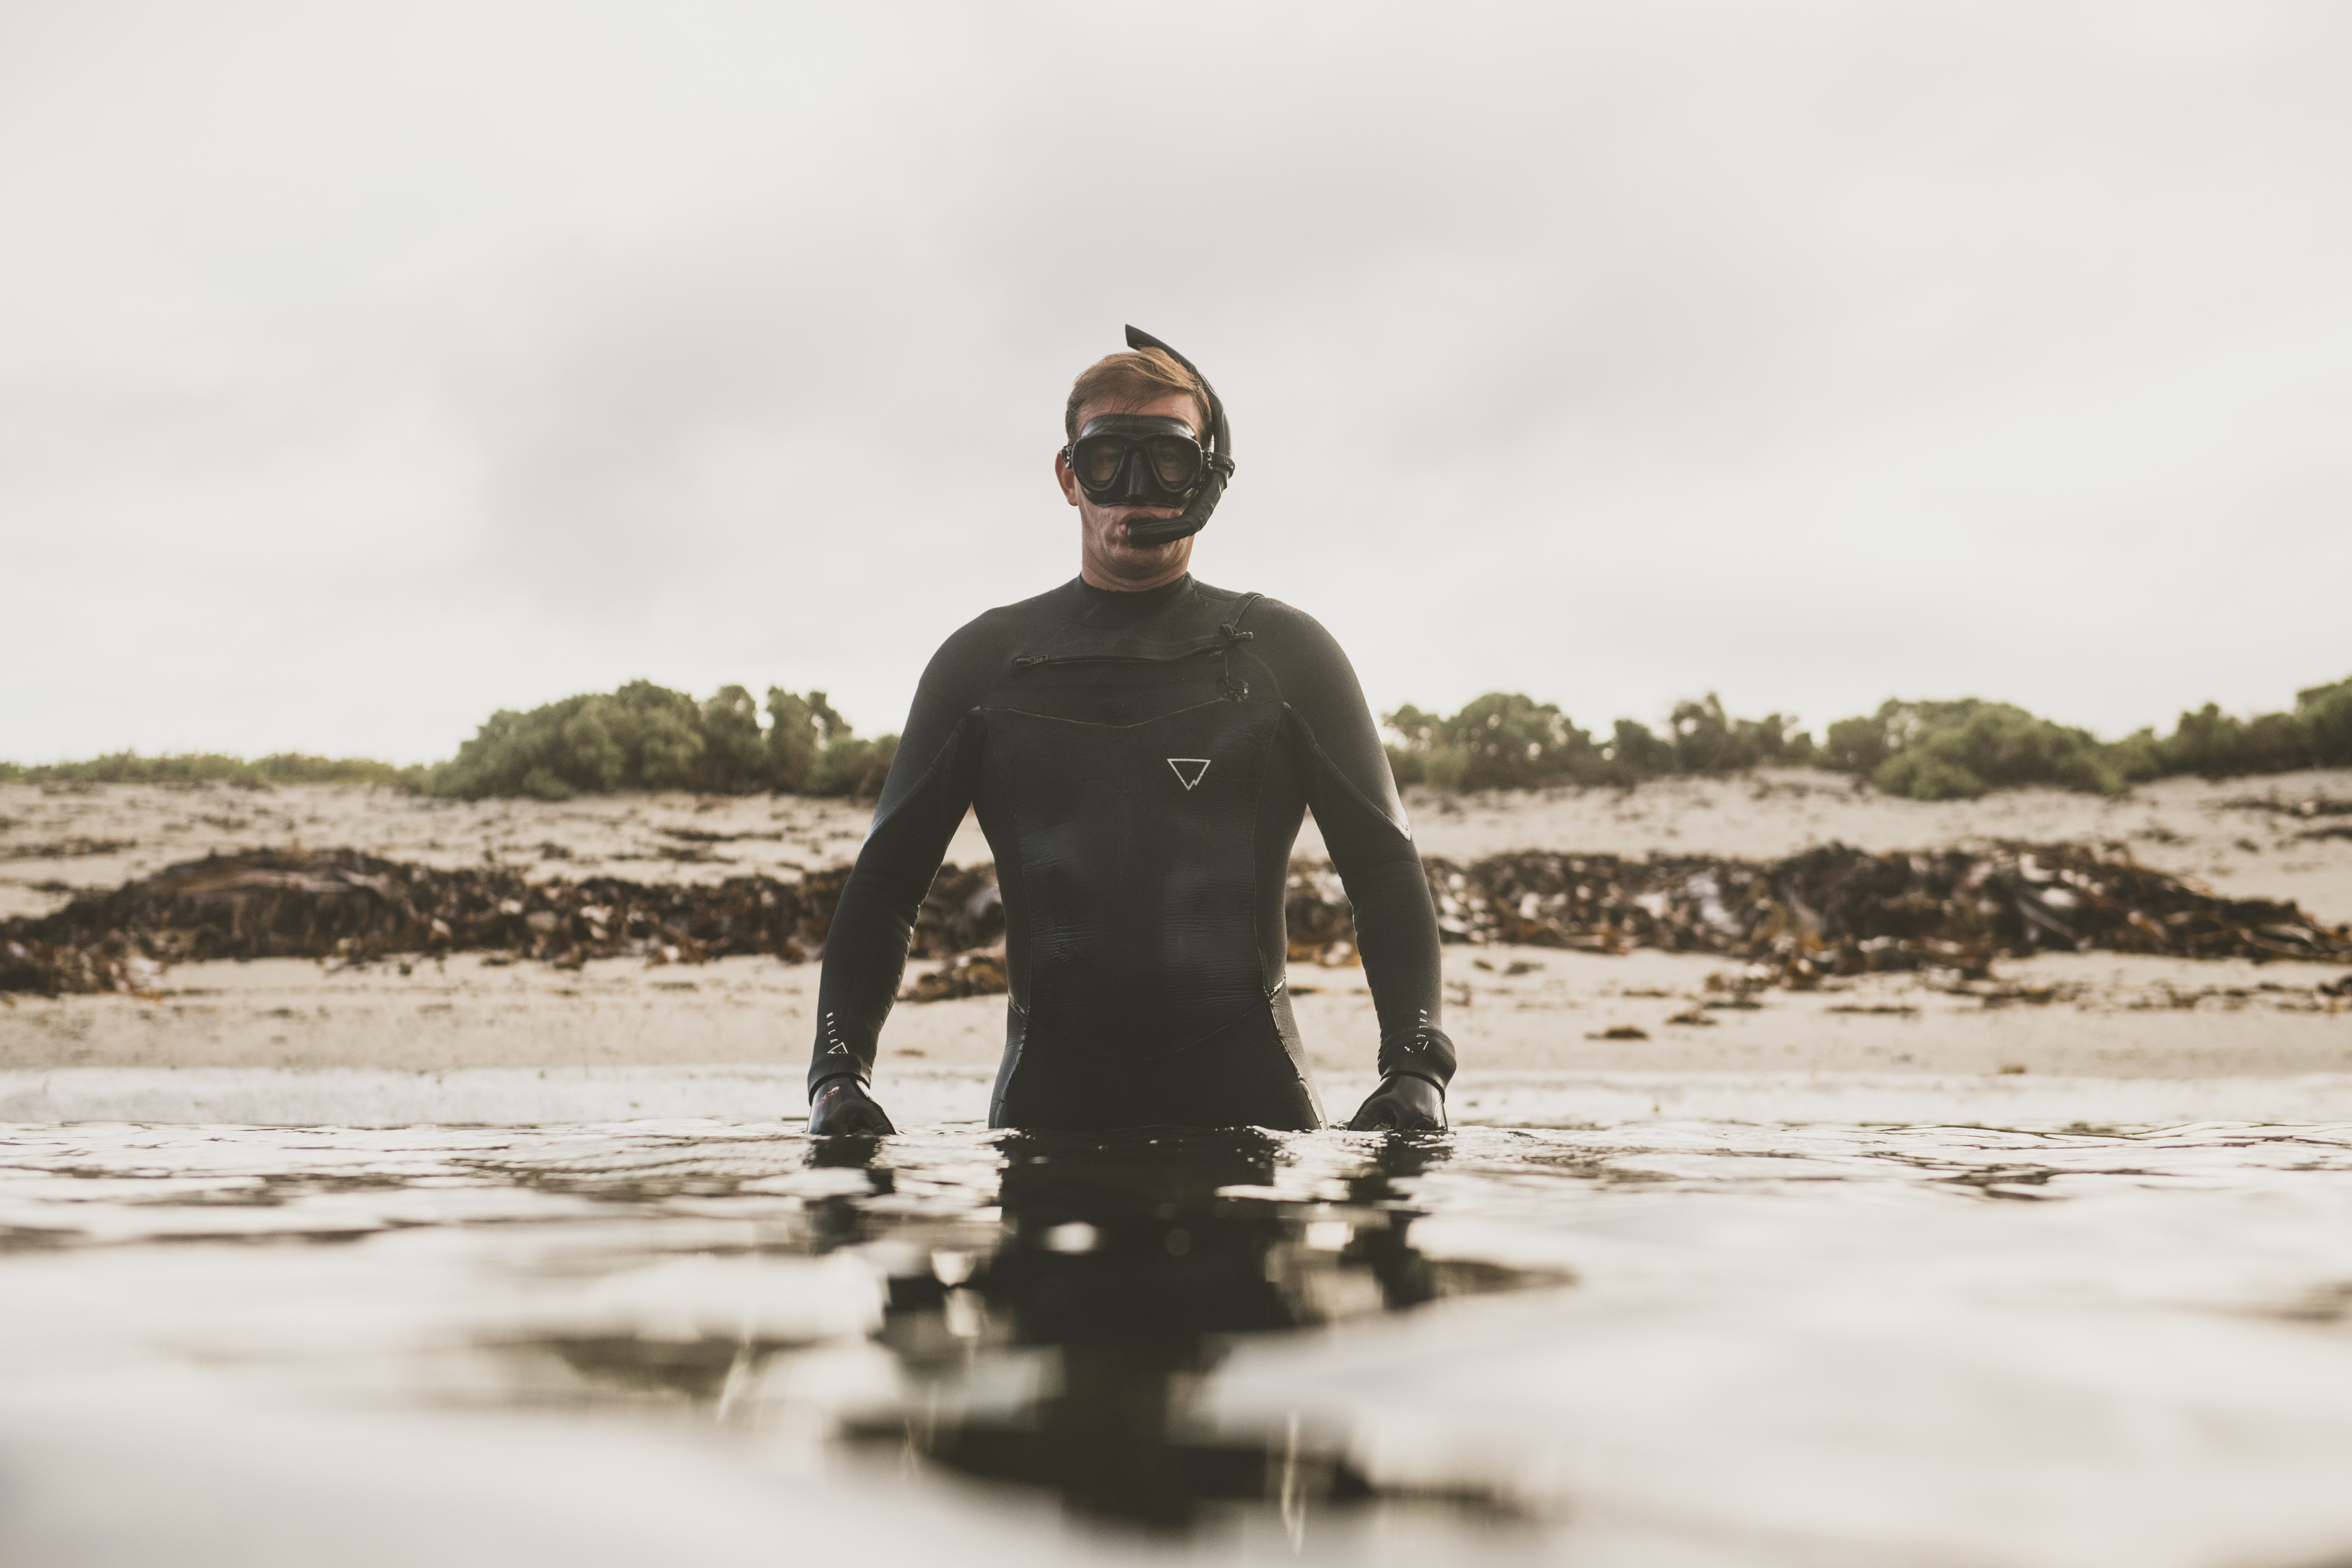 Person in the centre of image, standing in waist deep water, staring at the camera in a wetsuit and a snorkel and goggles on his face.